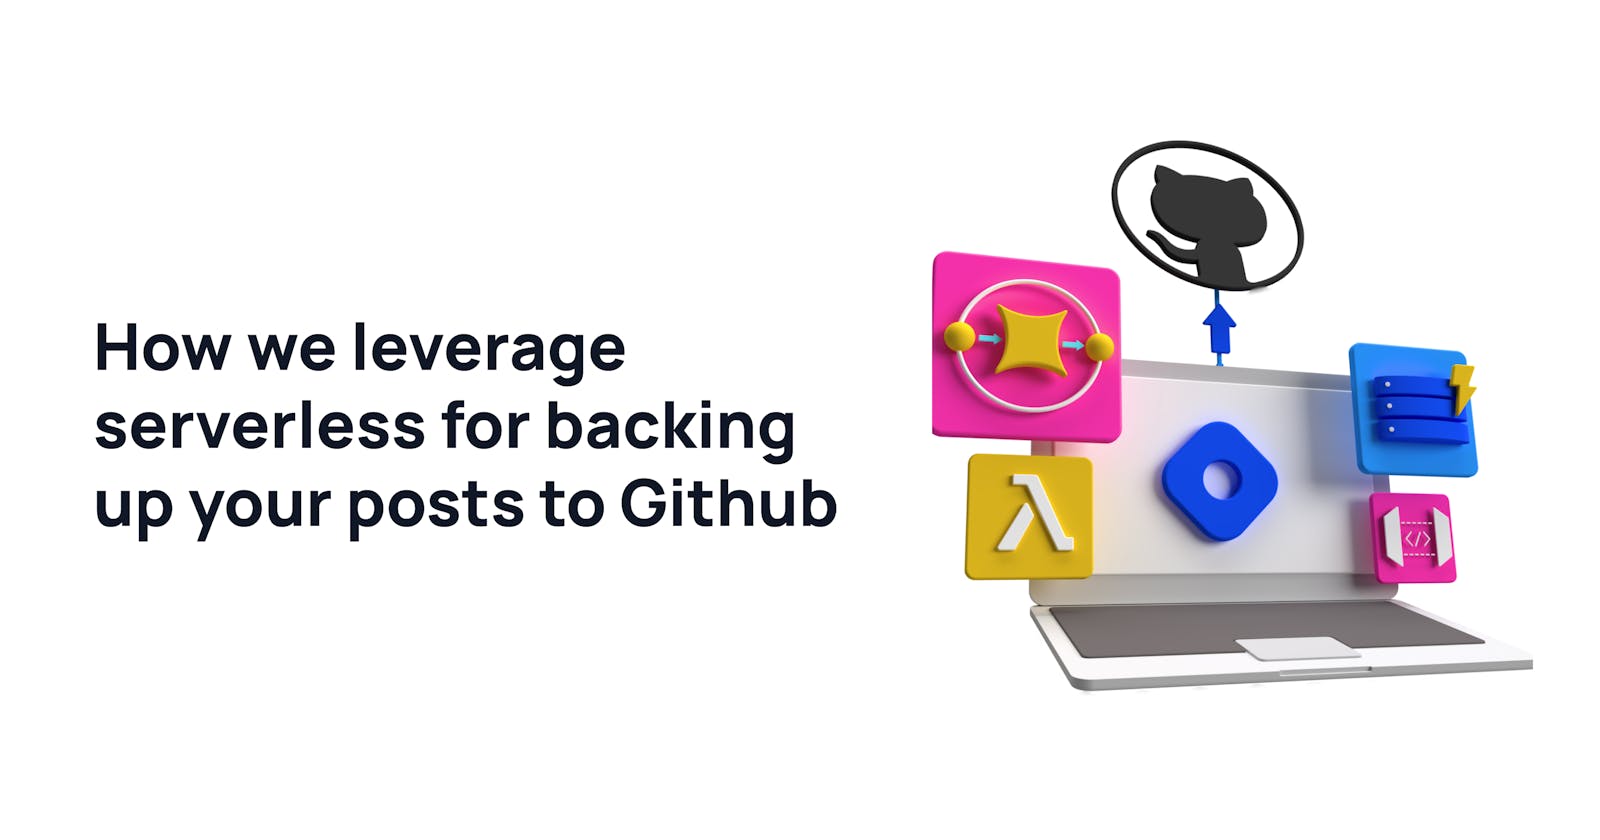 How We Leverage Serverless for Backing up Your Posts.